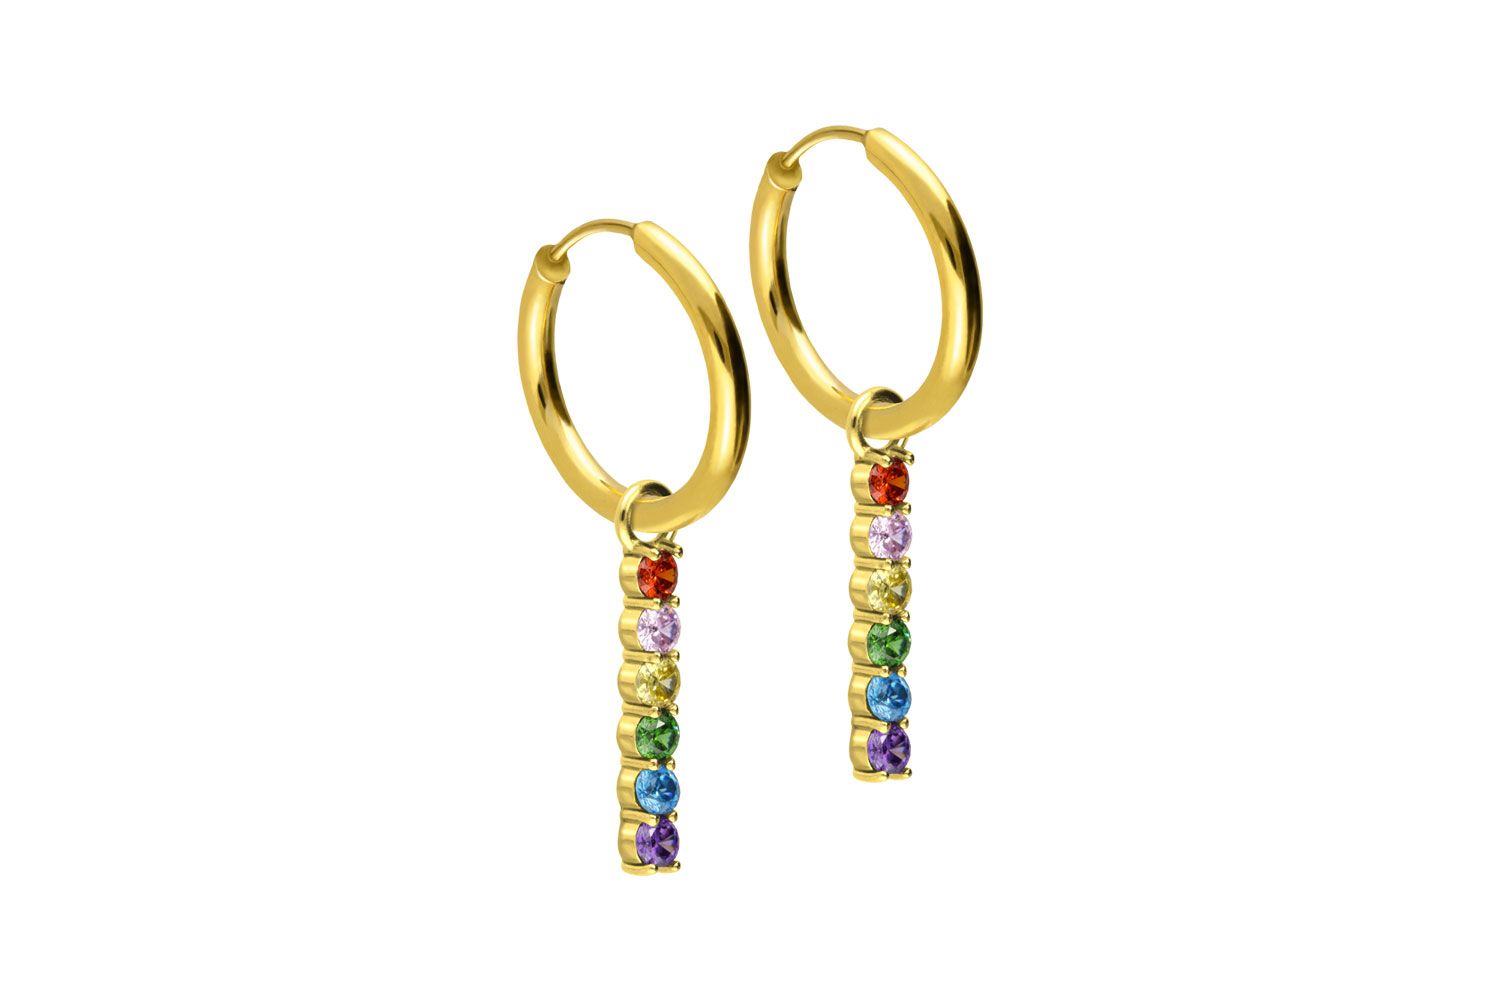 Surgical steel ear clicker creoles MULTICOLORED CRYSTAL BAR